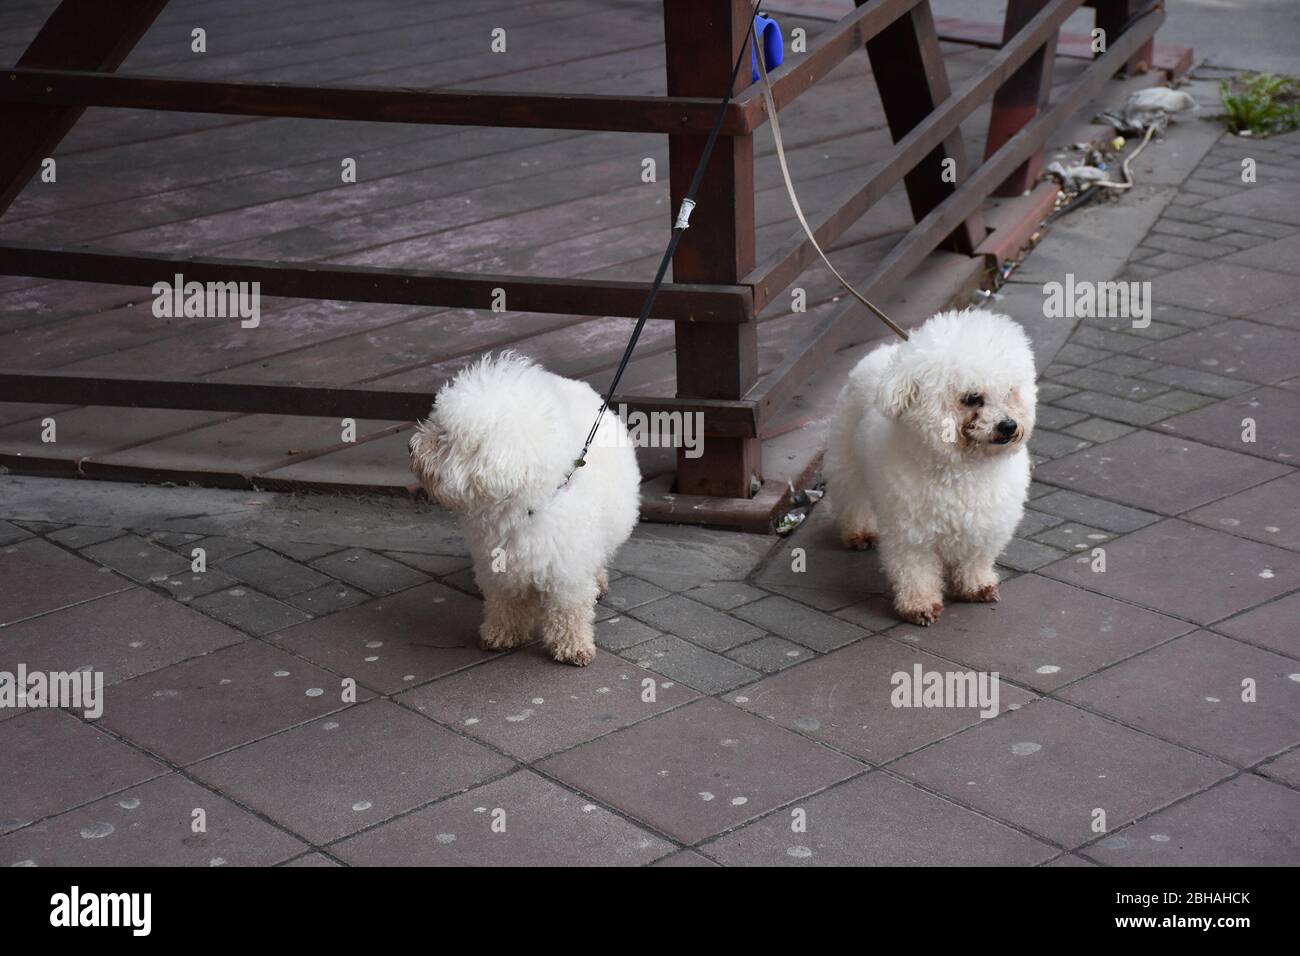 Two small white poodles on a leash stand next to the bench Stock Photo